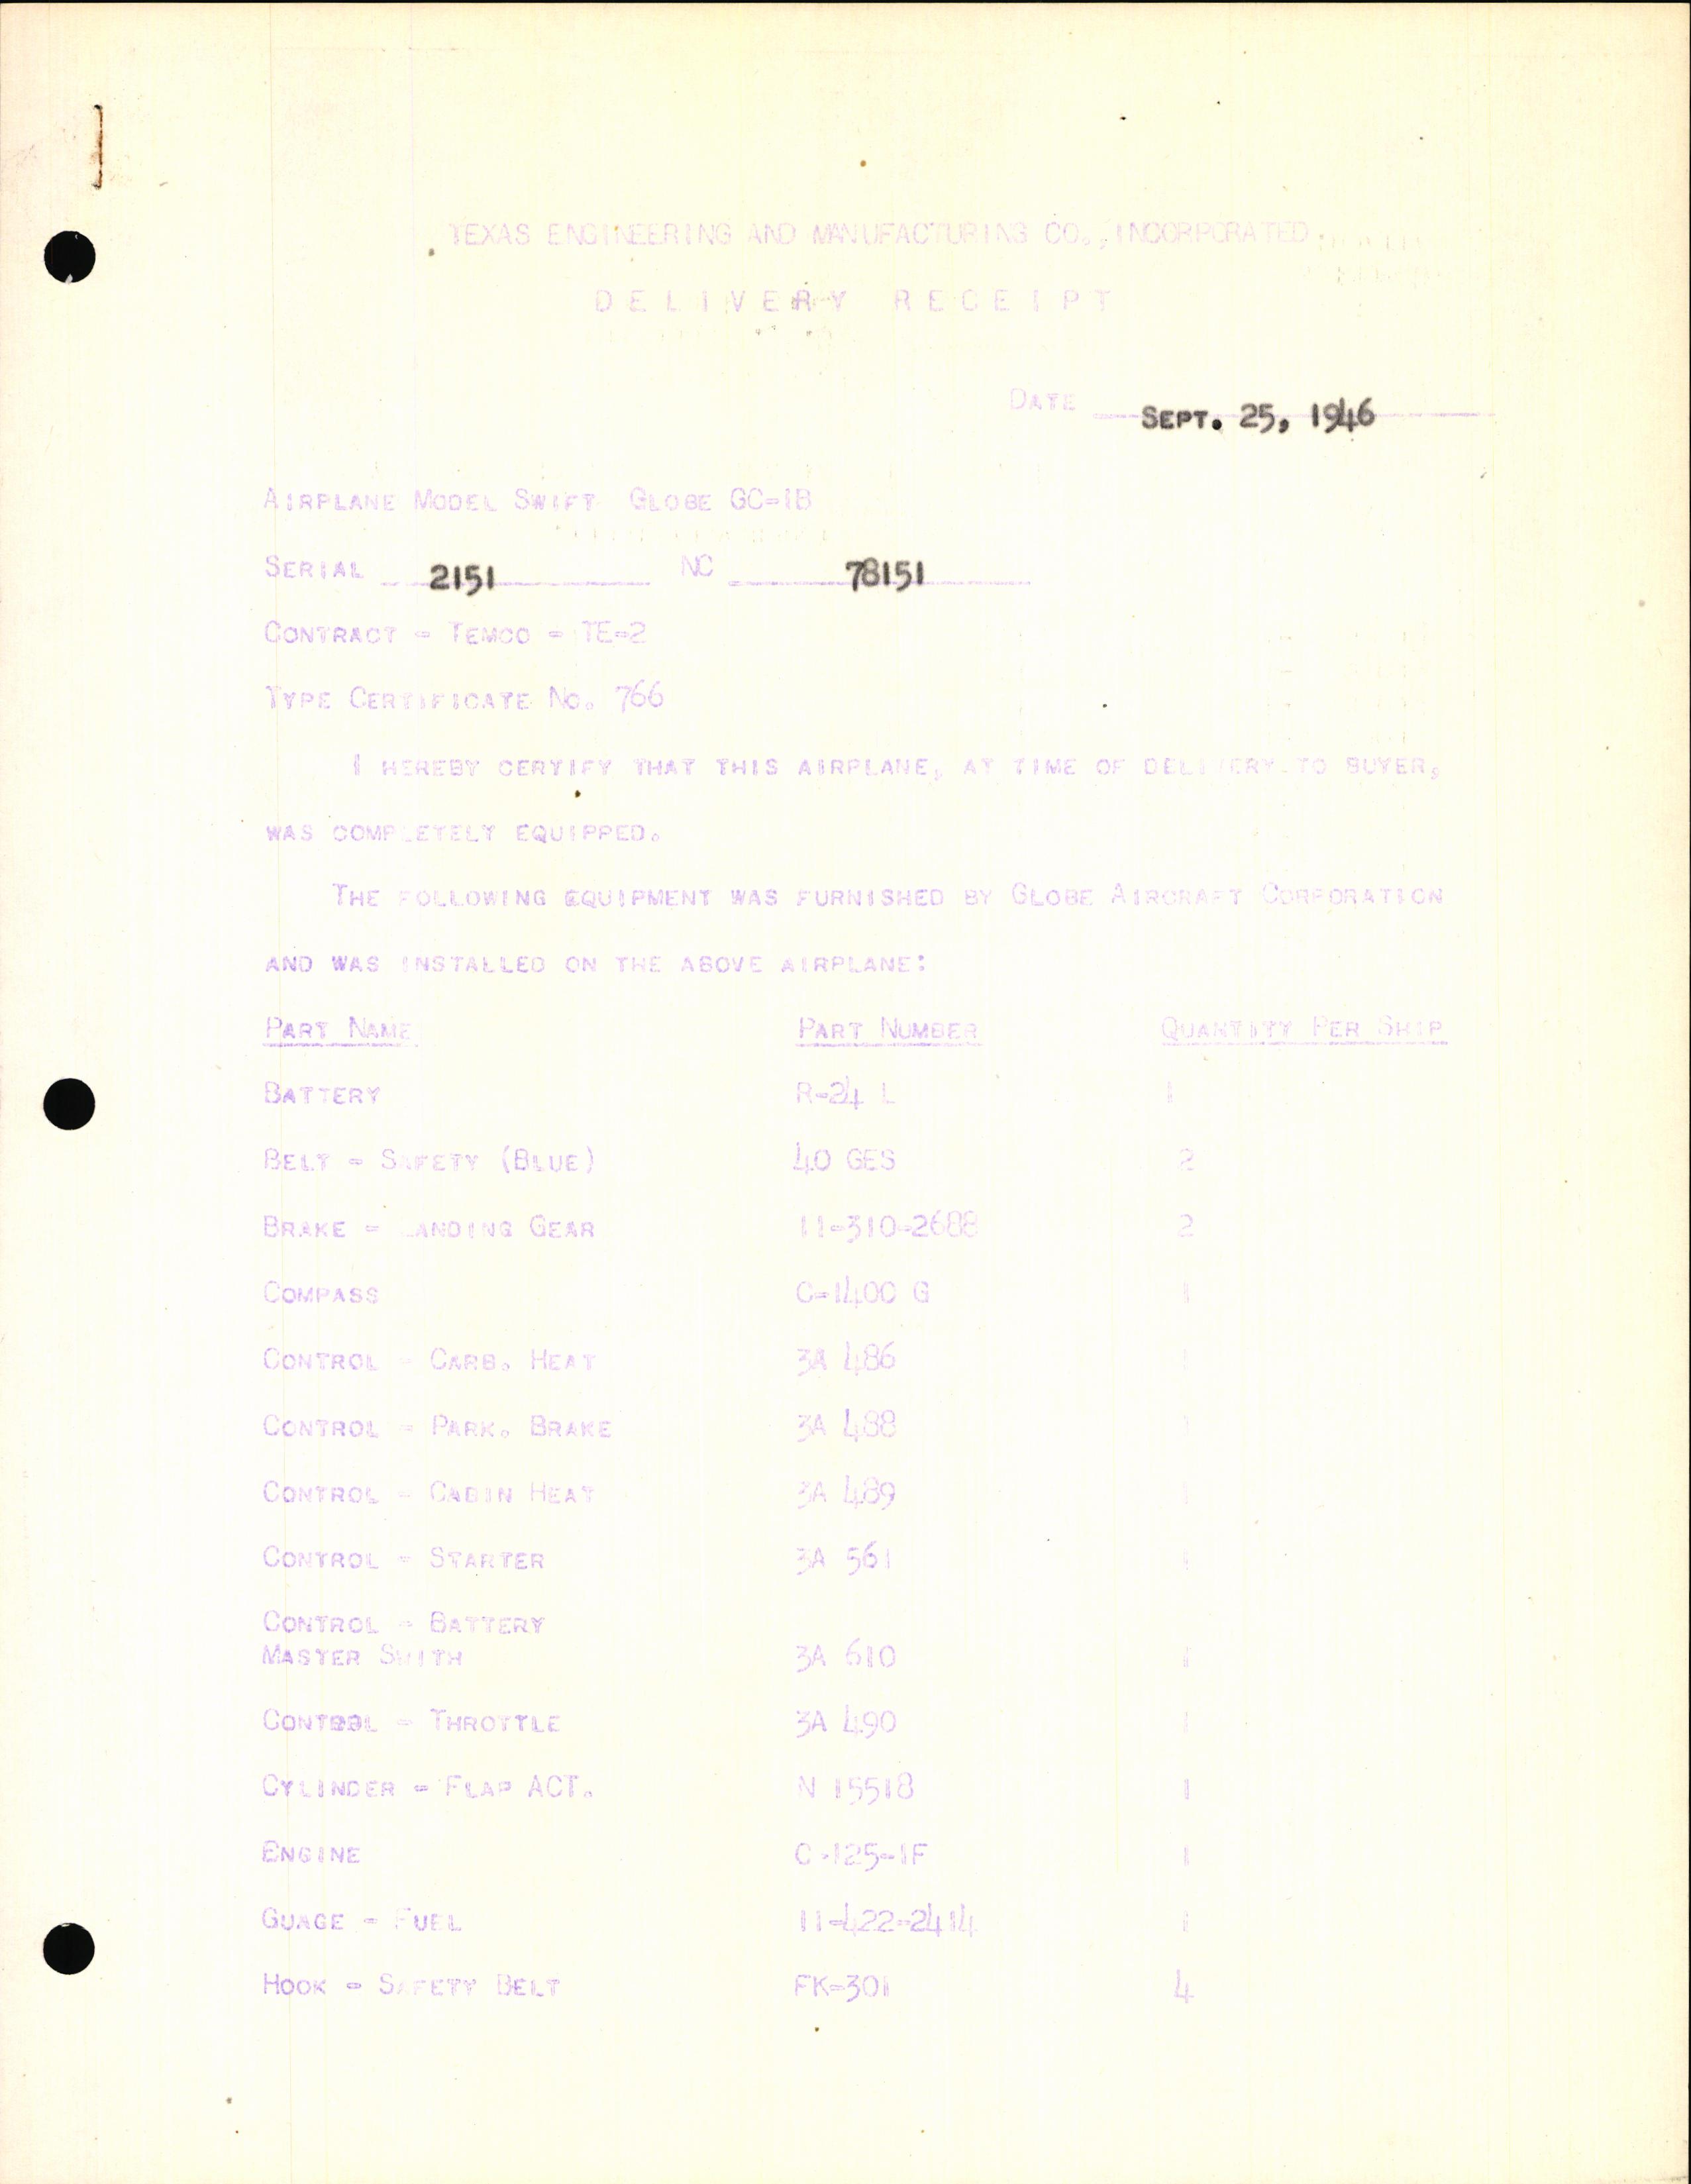 Sample page 3 from AirCorps Library document: Technical Information for Serial Number 2151